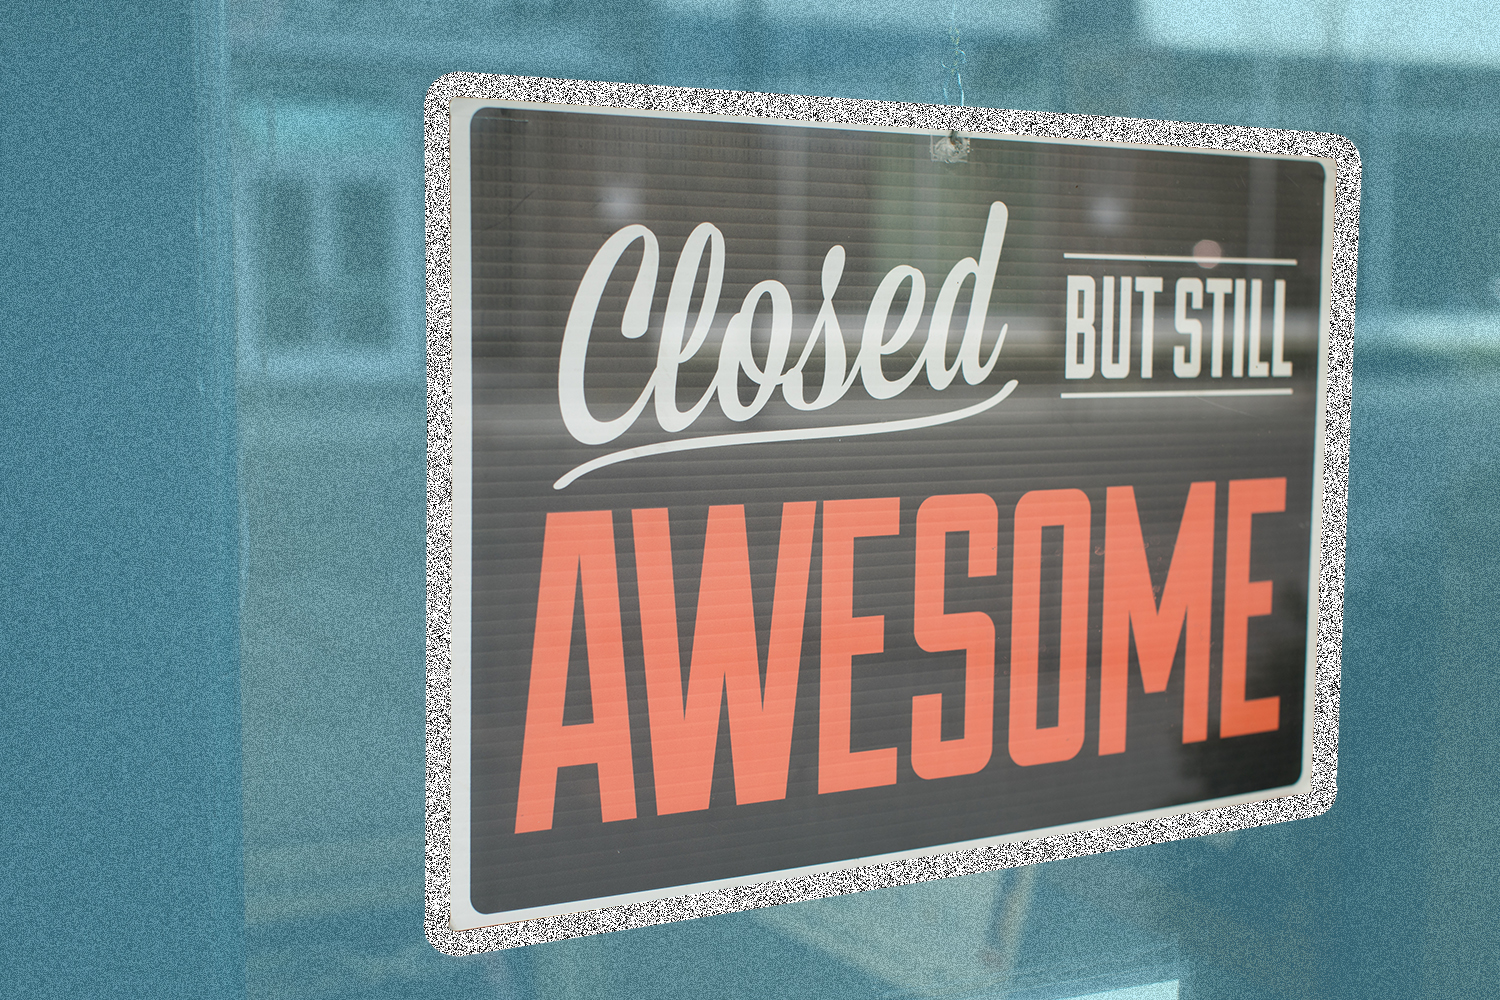 image of storefront with sign posted that says, "Closed but still awesome"